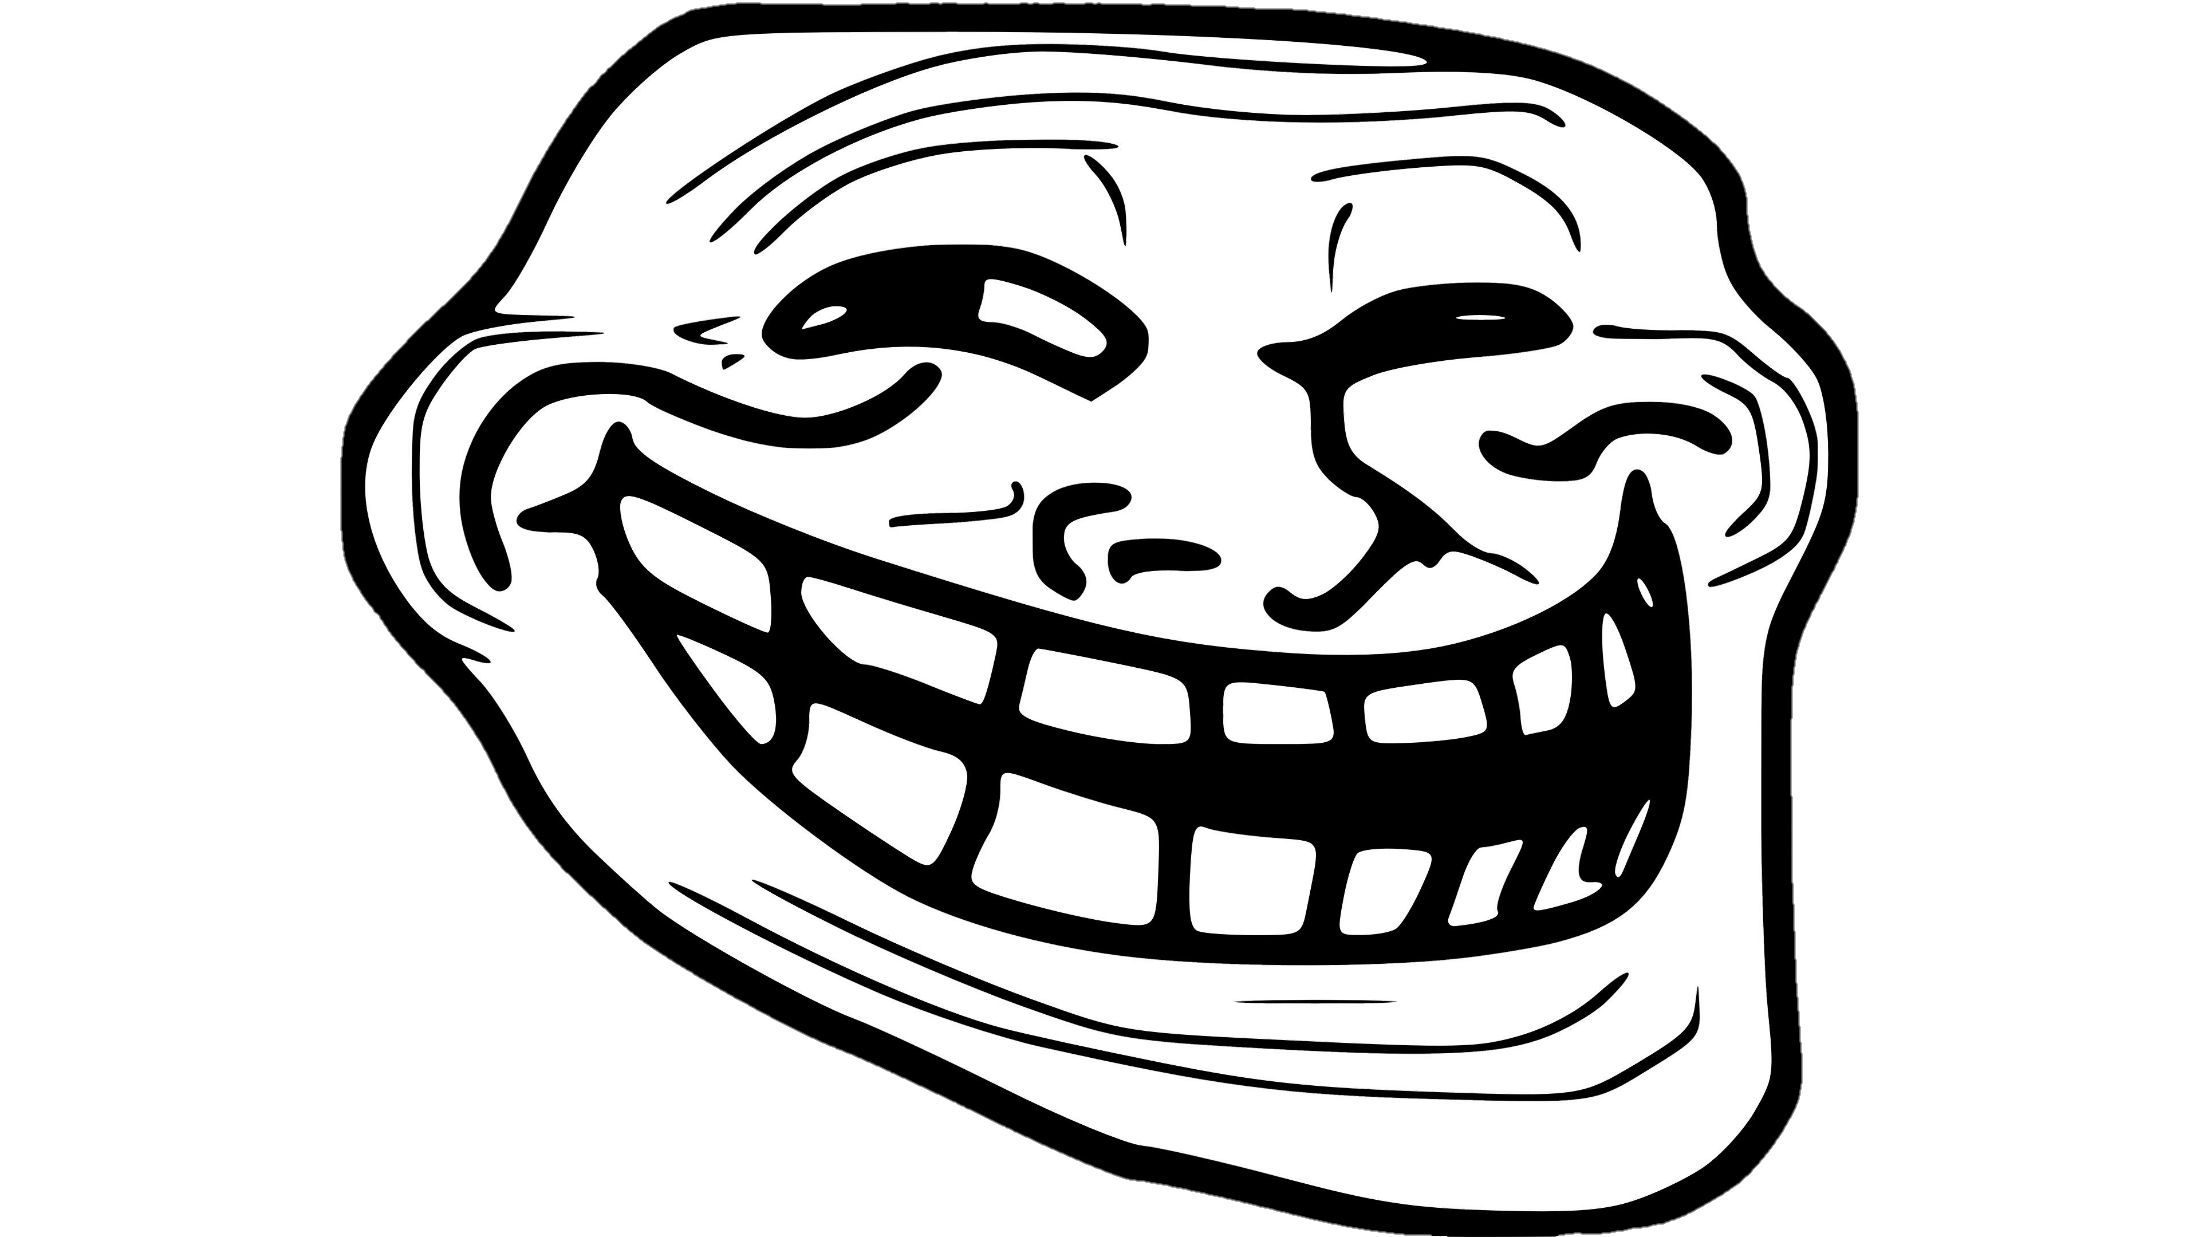 trollface-png-from-pngfre-39